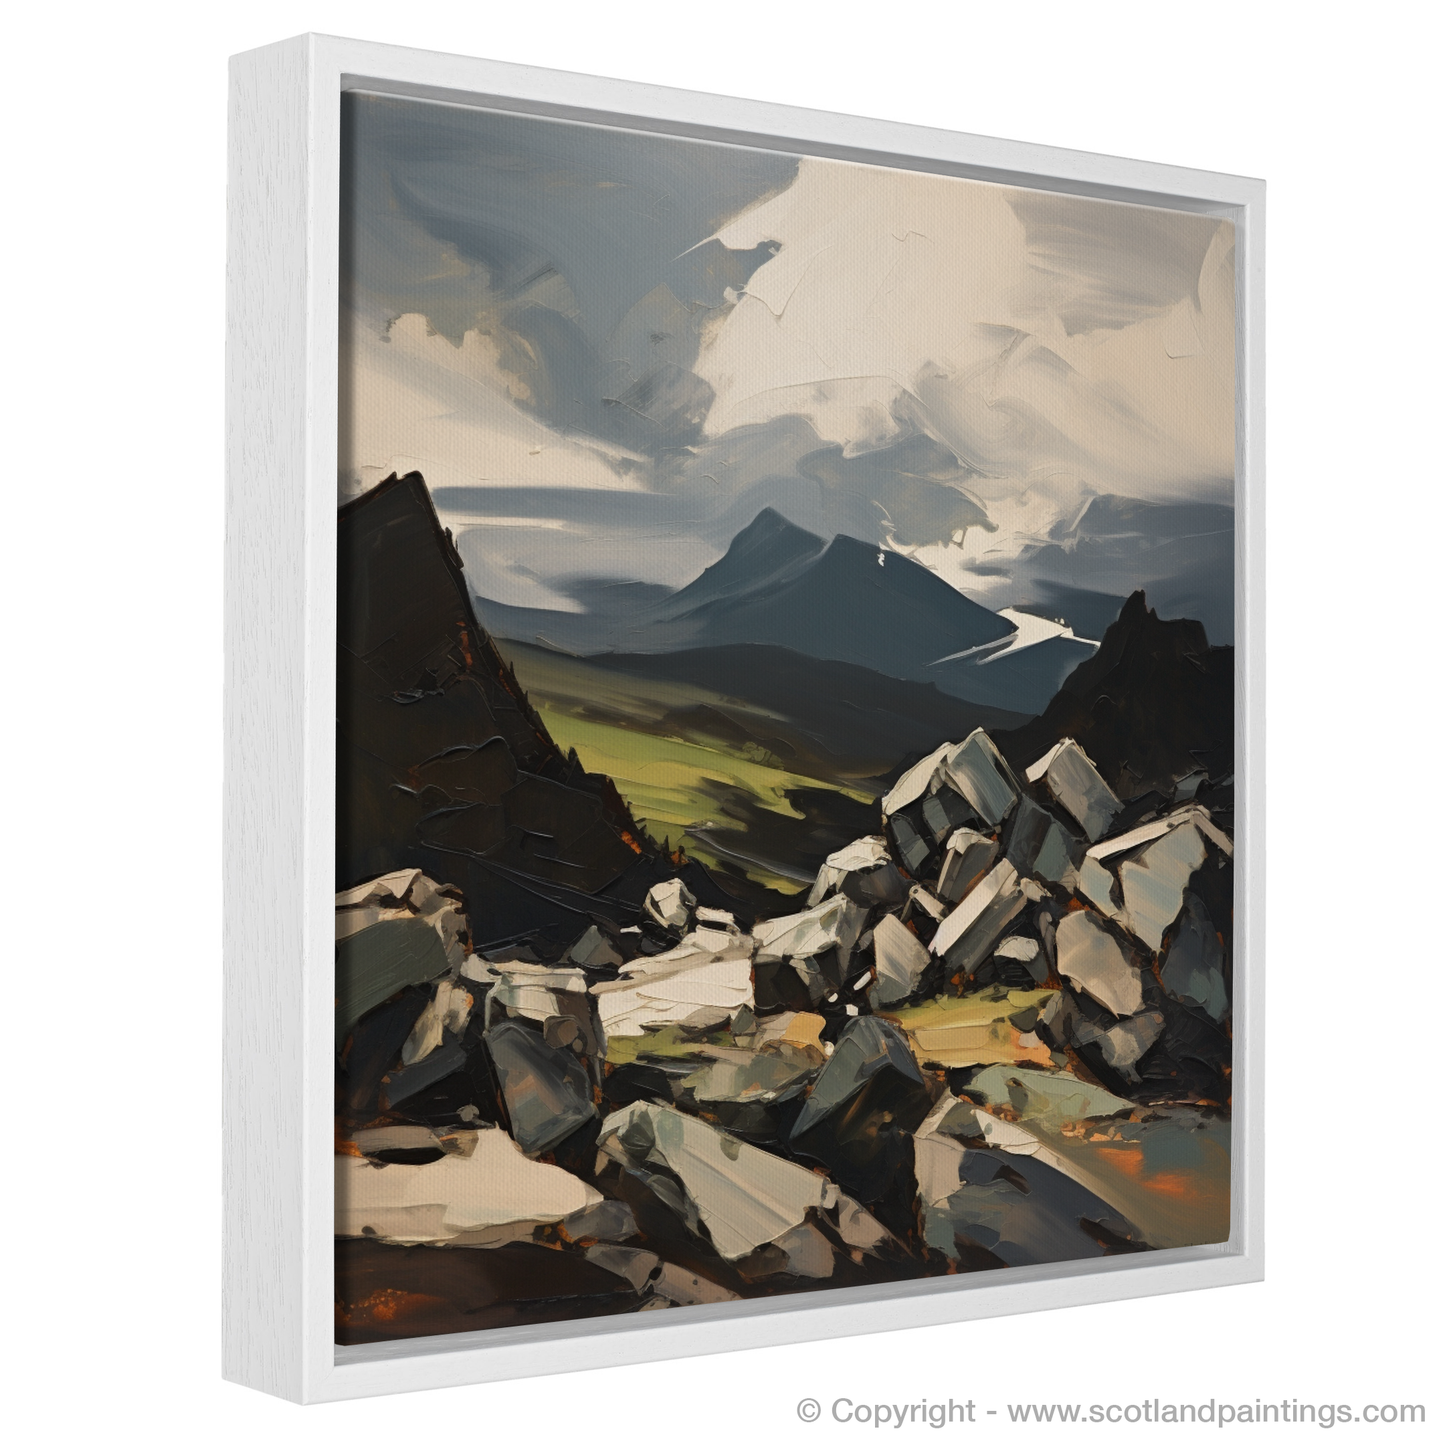 Painting and Art Print of Cairn Gorm entitled "Expressionist Ode to Cairn Gorm".